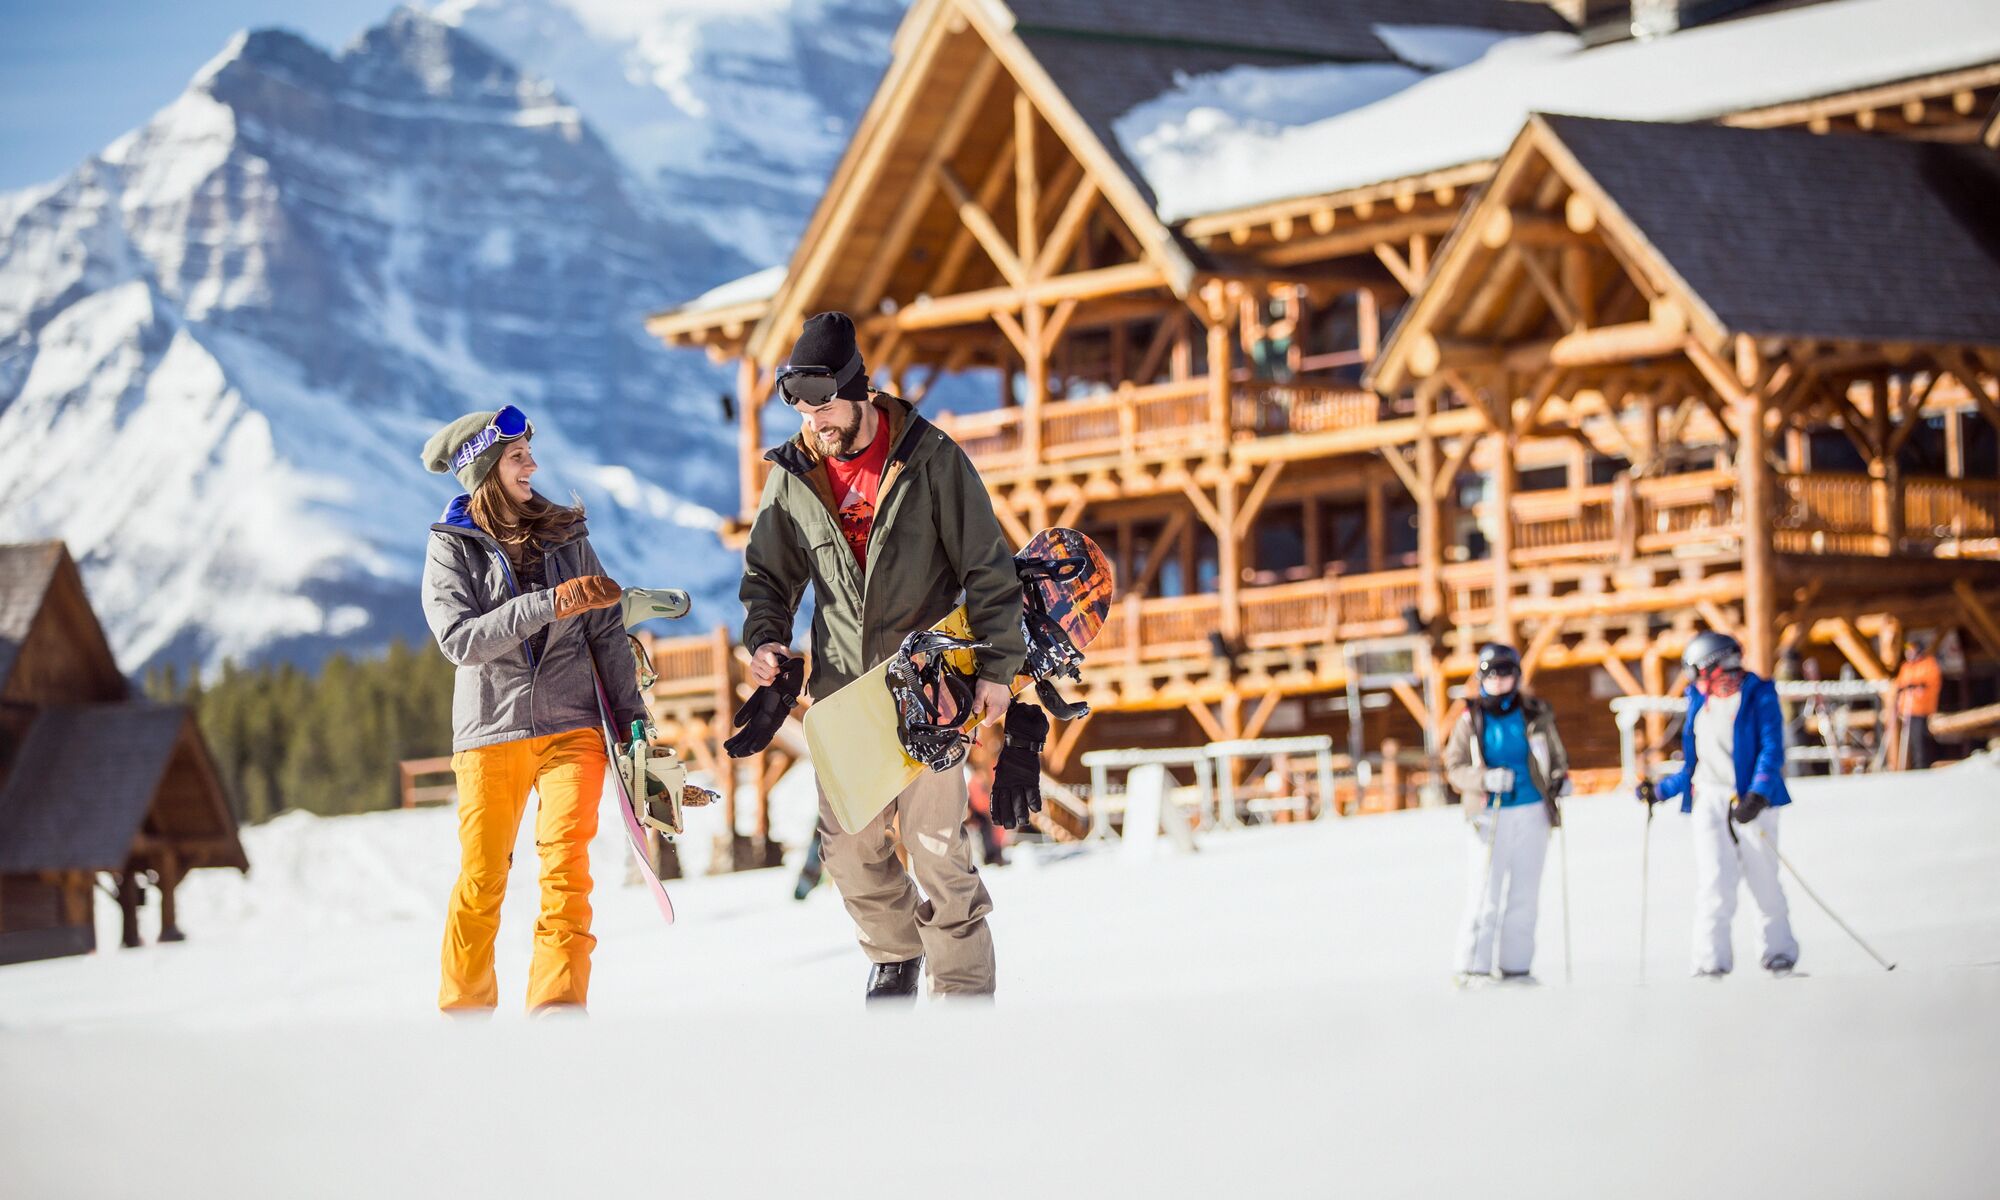 A couple walking and enjoying the cold winter day in Lake Louise Ski Resort.